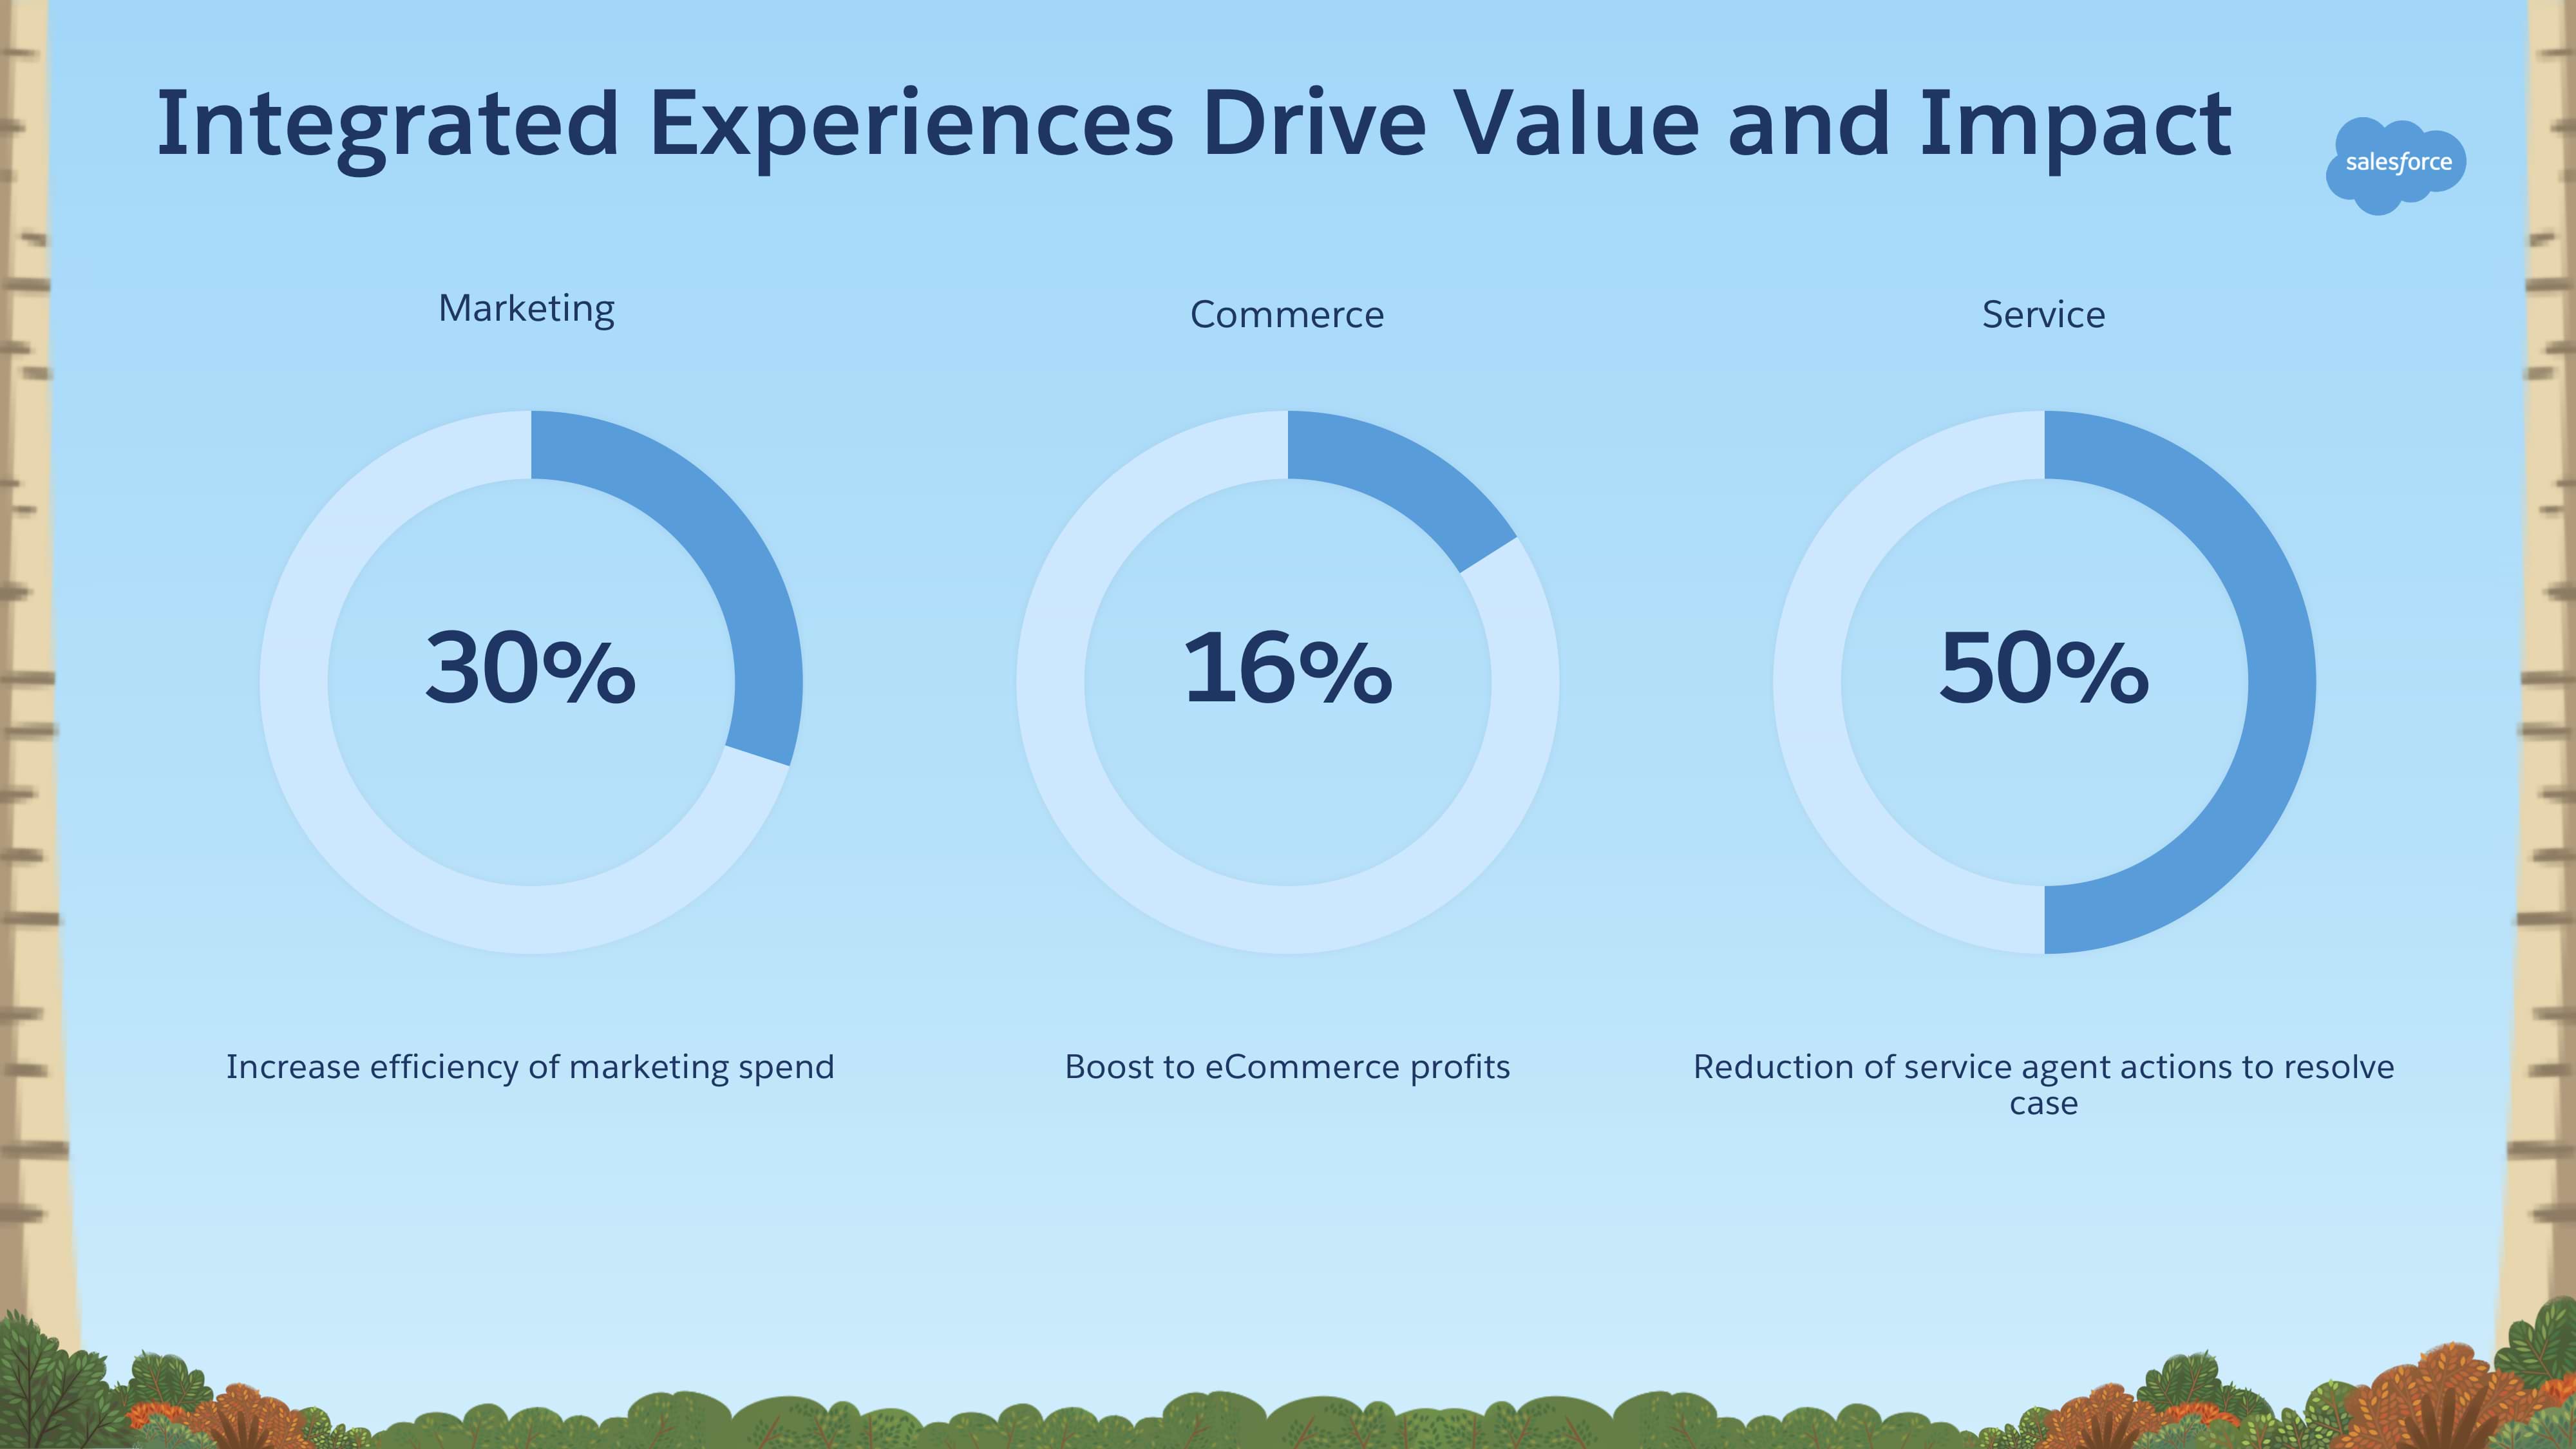 Stats on integrated experiences driving more value and impact